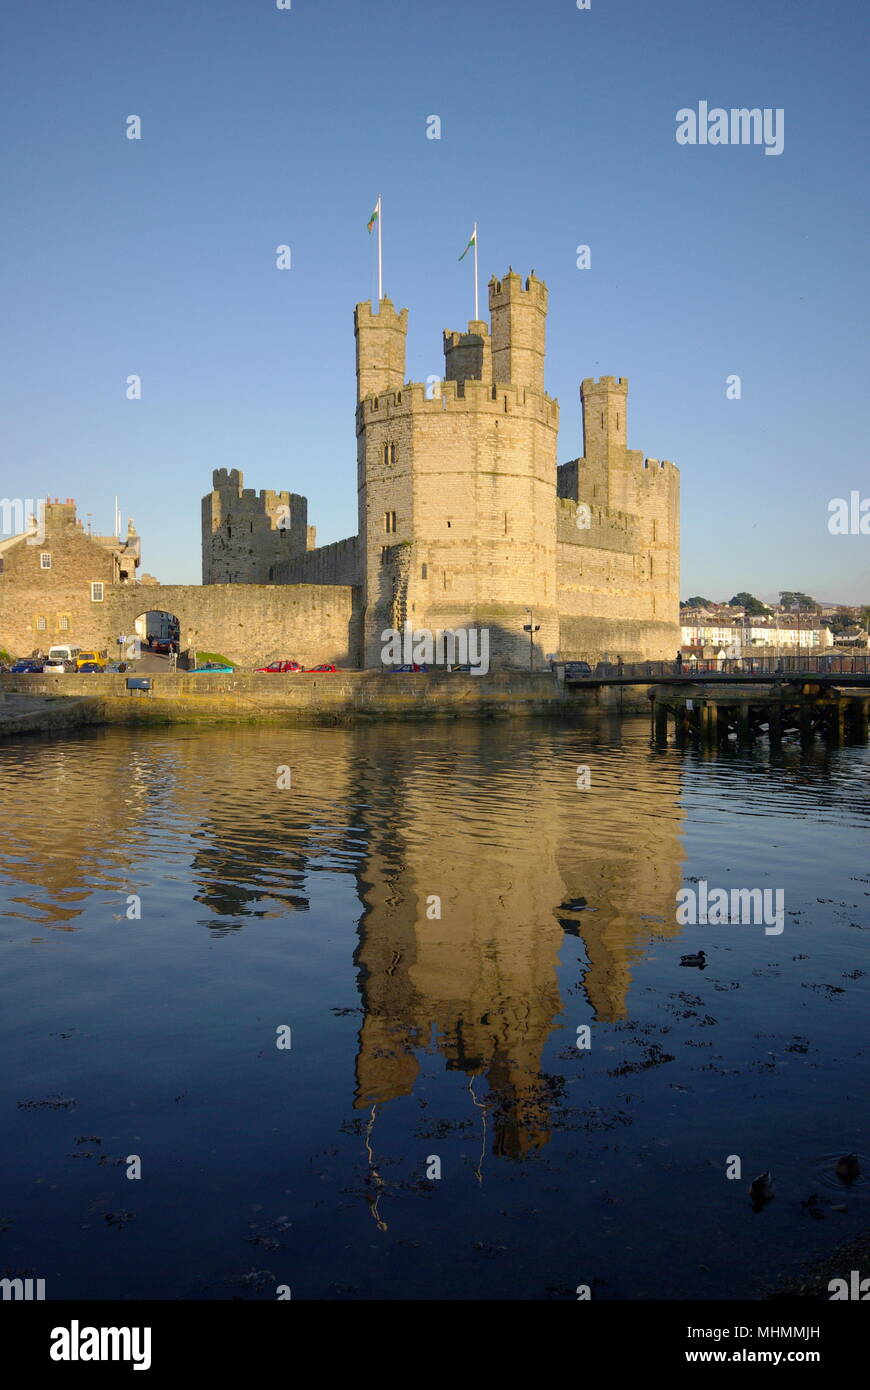 View of Caernarfon (Caernarvon) Castle in Gwynedd, North Wales.  The castle was built by the English King Edward I from around 1283, on the site of a Roman fortress and Norman motte. Stock Photo